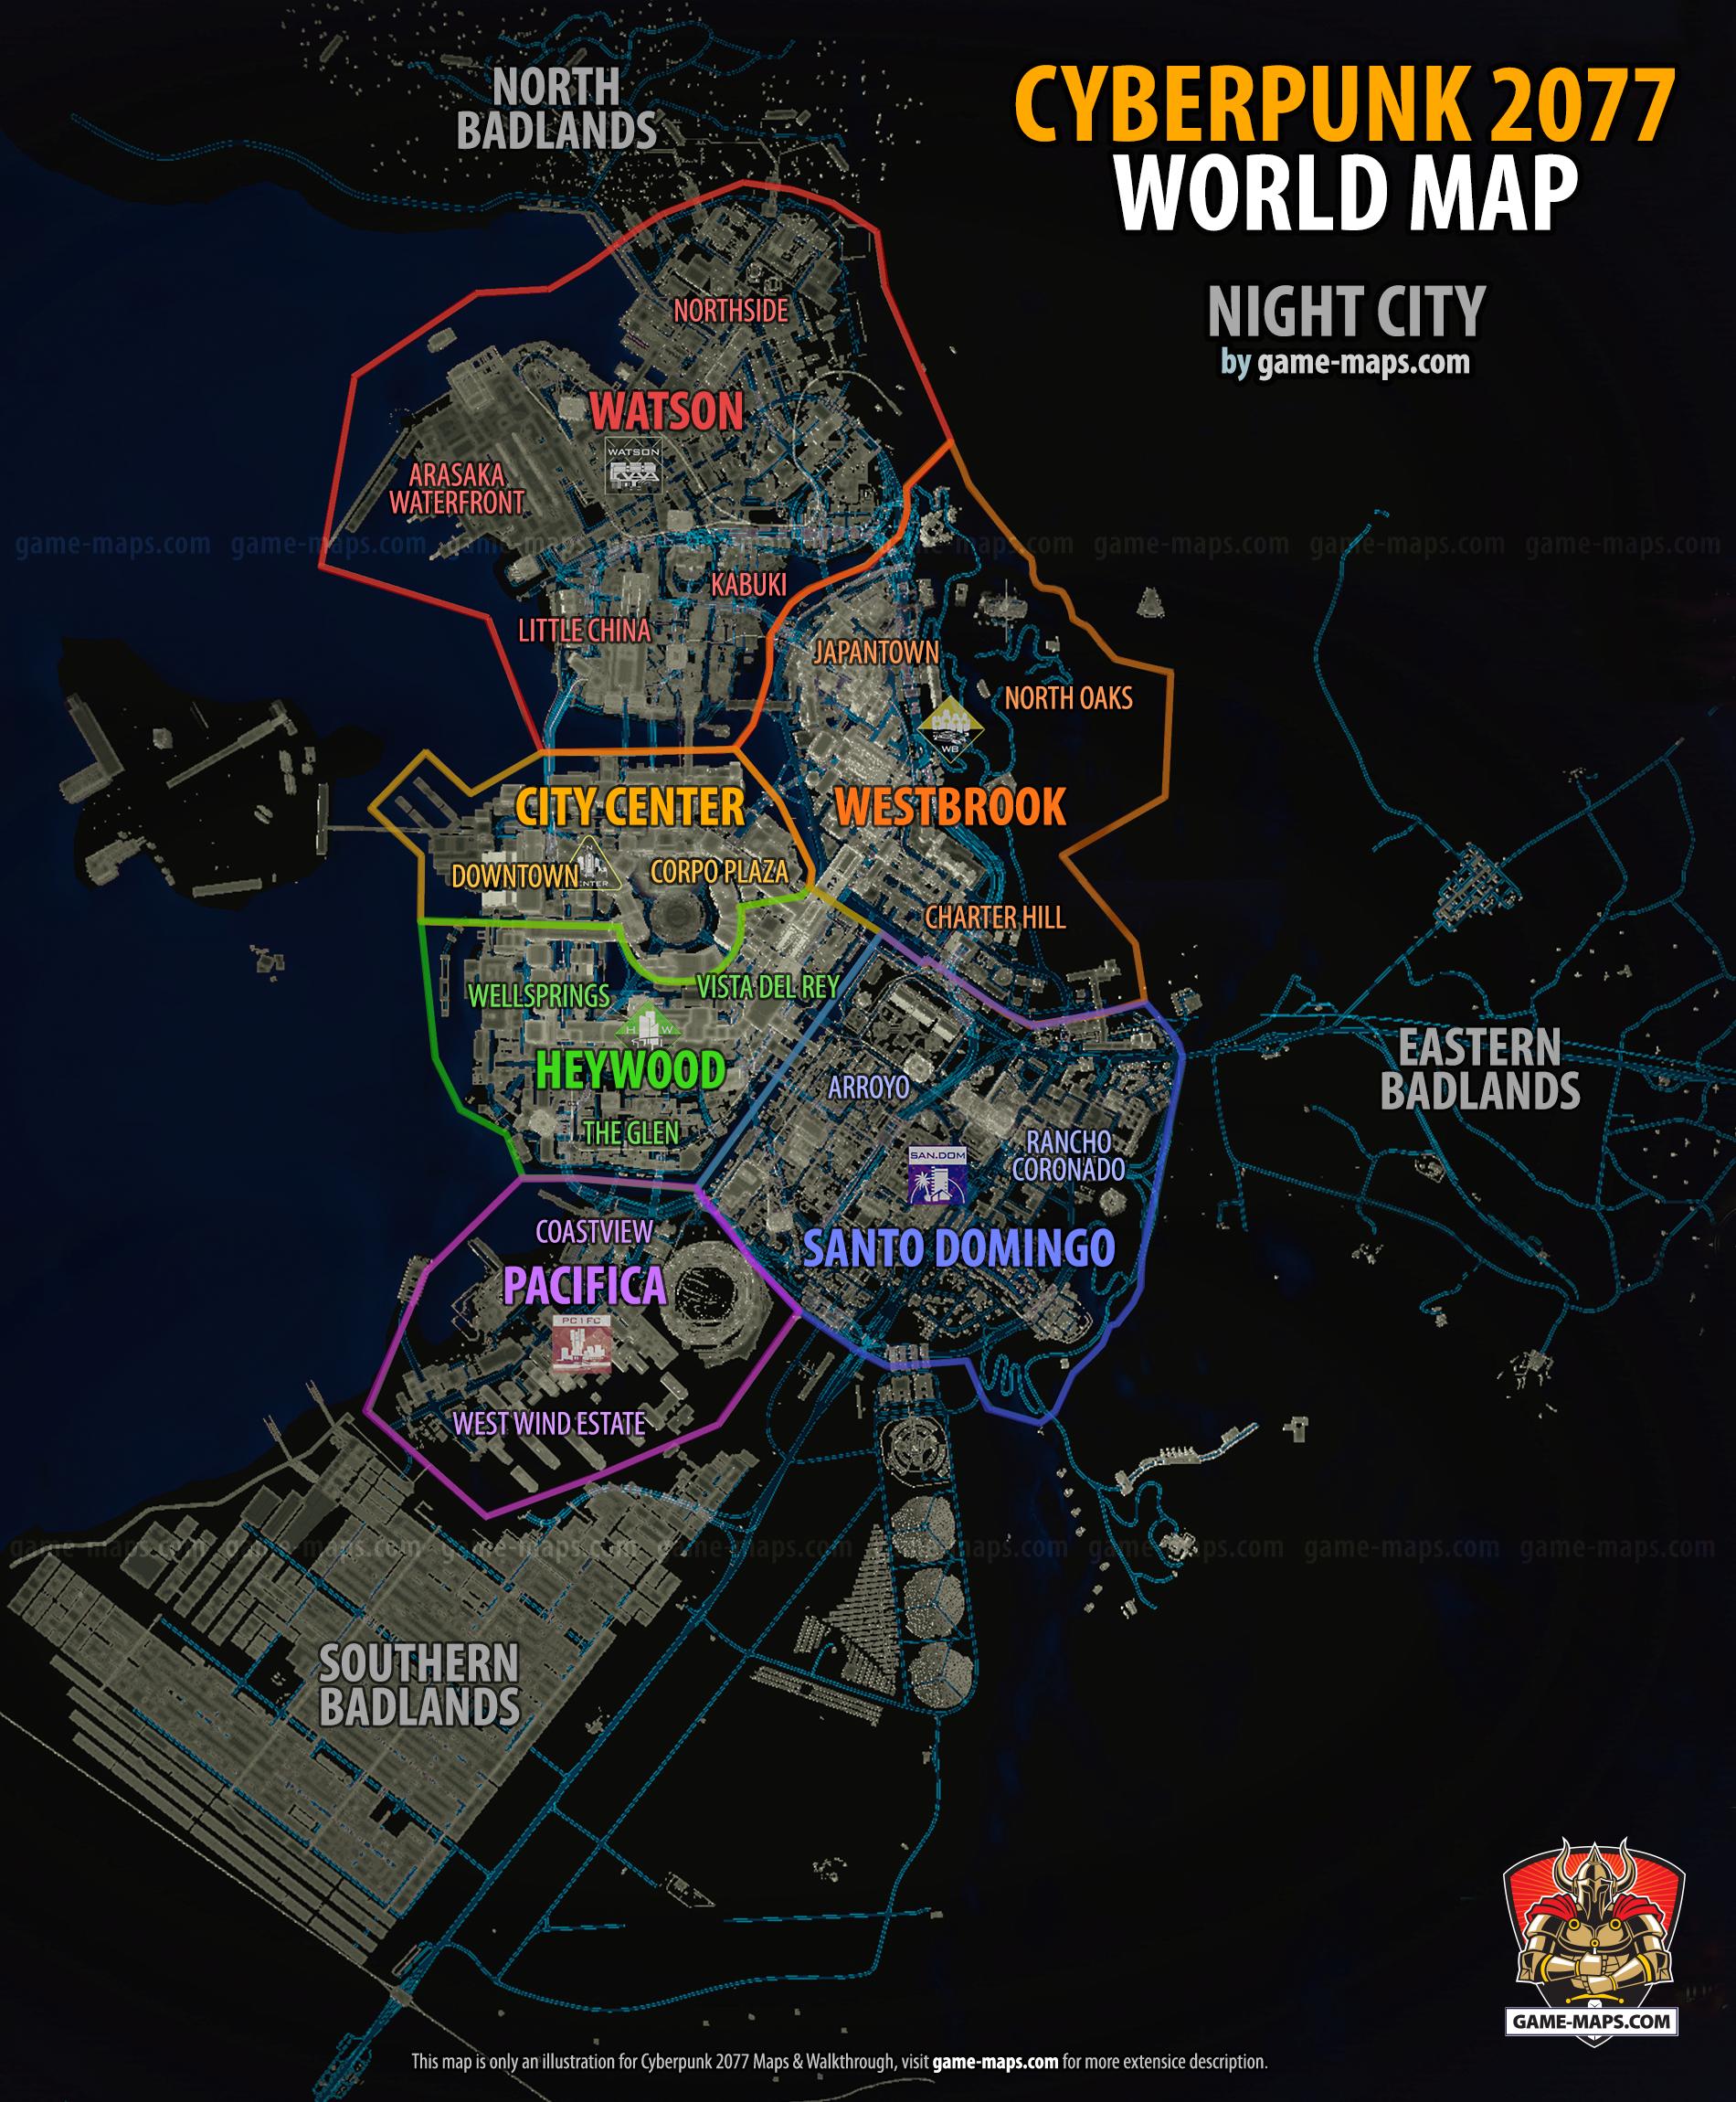 Full World Map for Cyberpunk 2077, Districts and Subdistricts of Night City.